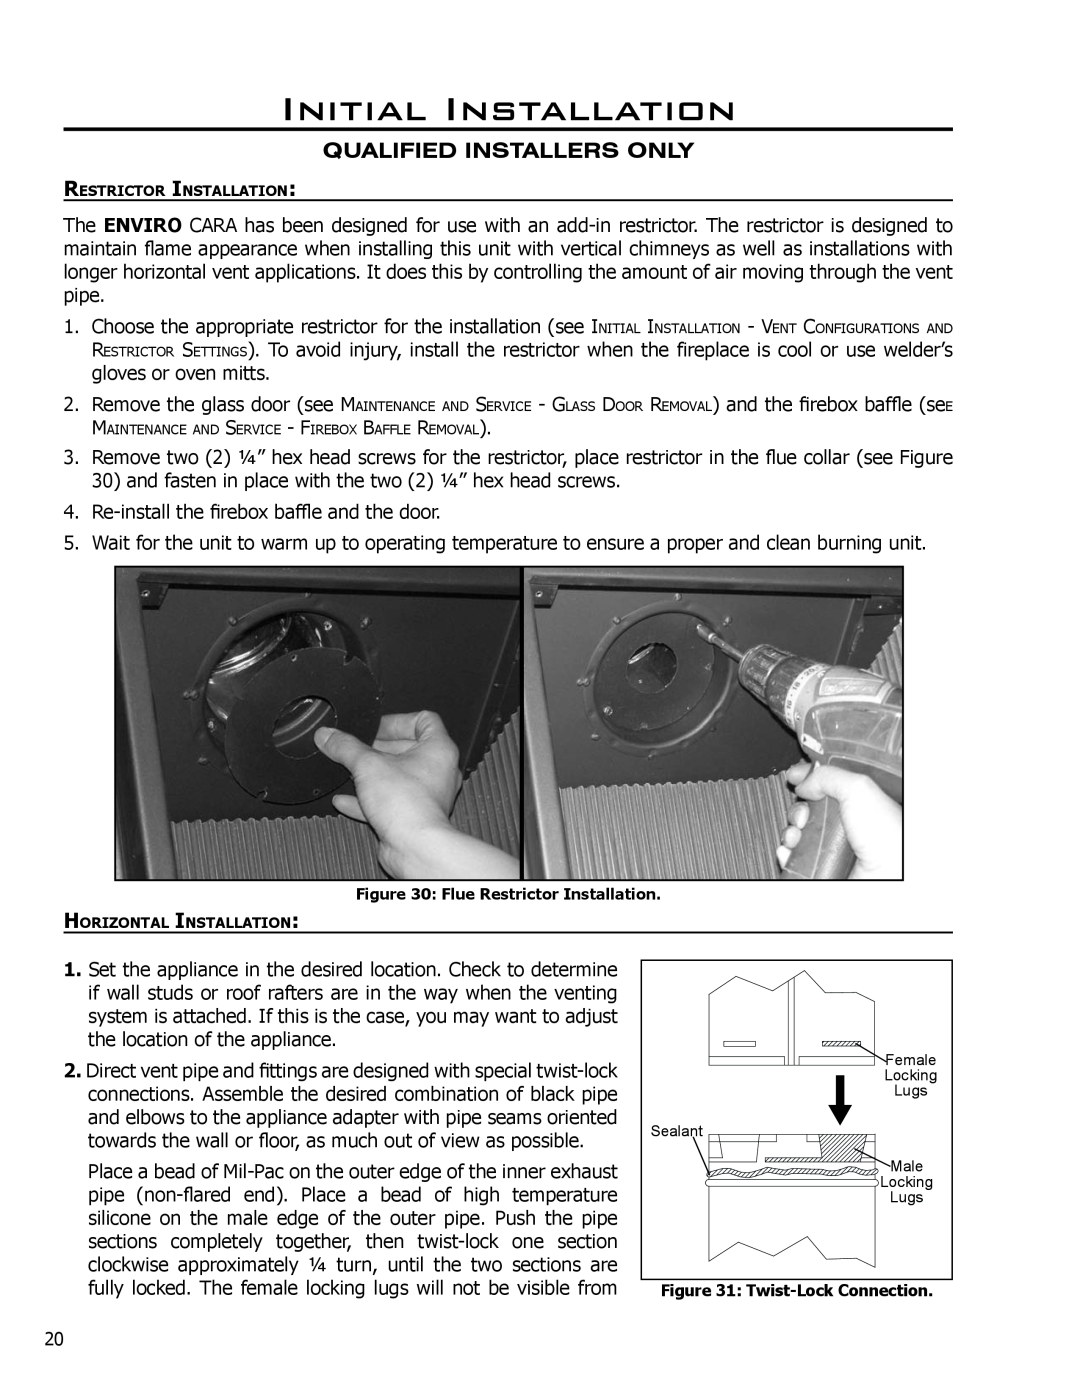 Enviro Cara owner manual Initial Installation, Qualified Installers Only, Re-install the firebox baffle and the door 